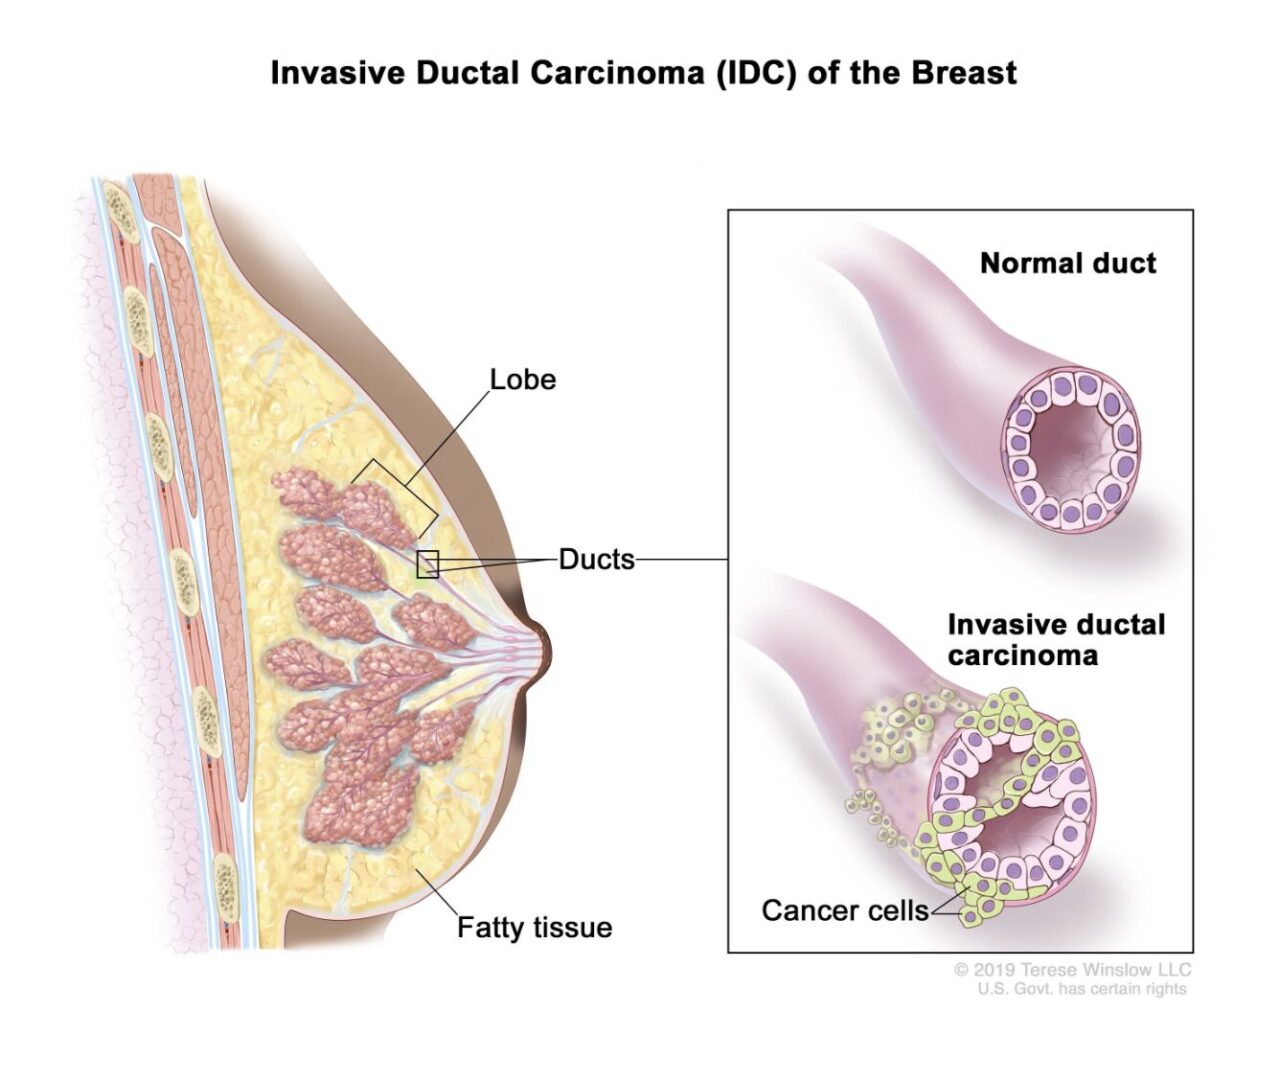 Native Hawaiian and Pacific Islander populations and higher rates of inflammatory breast cancer – NCI Center for Cancer Research